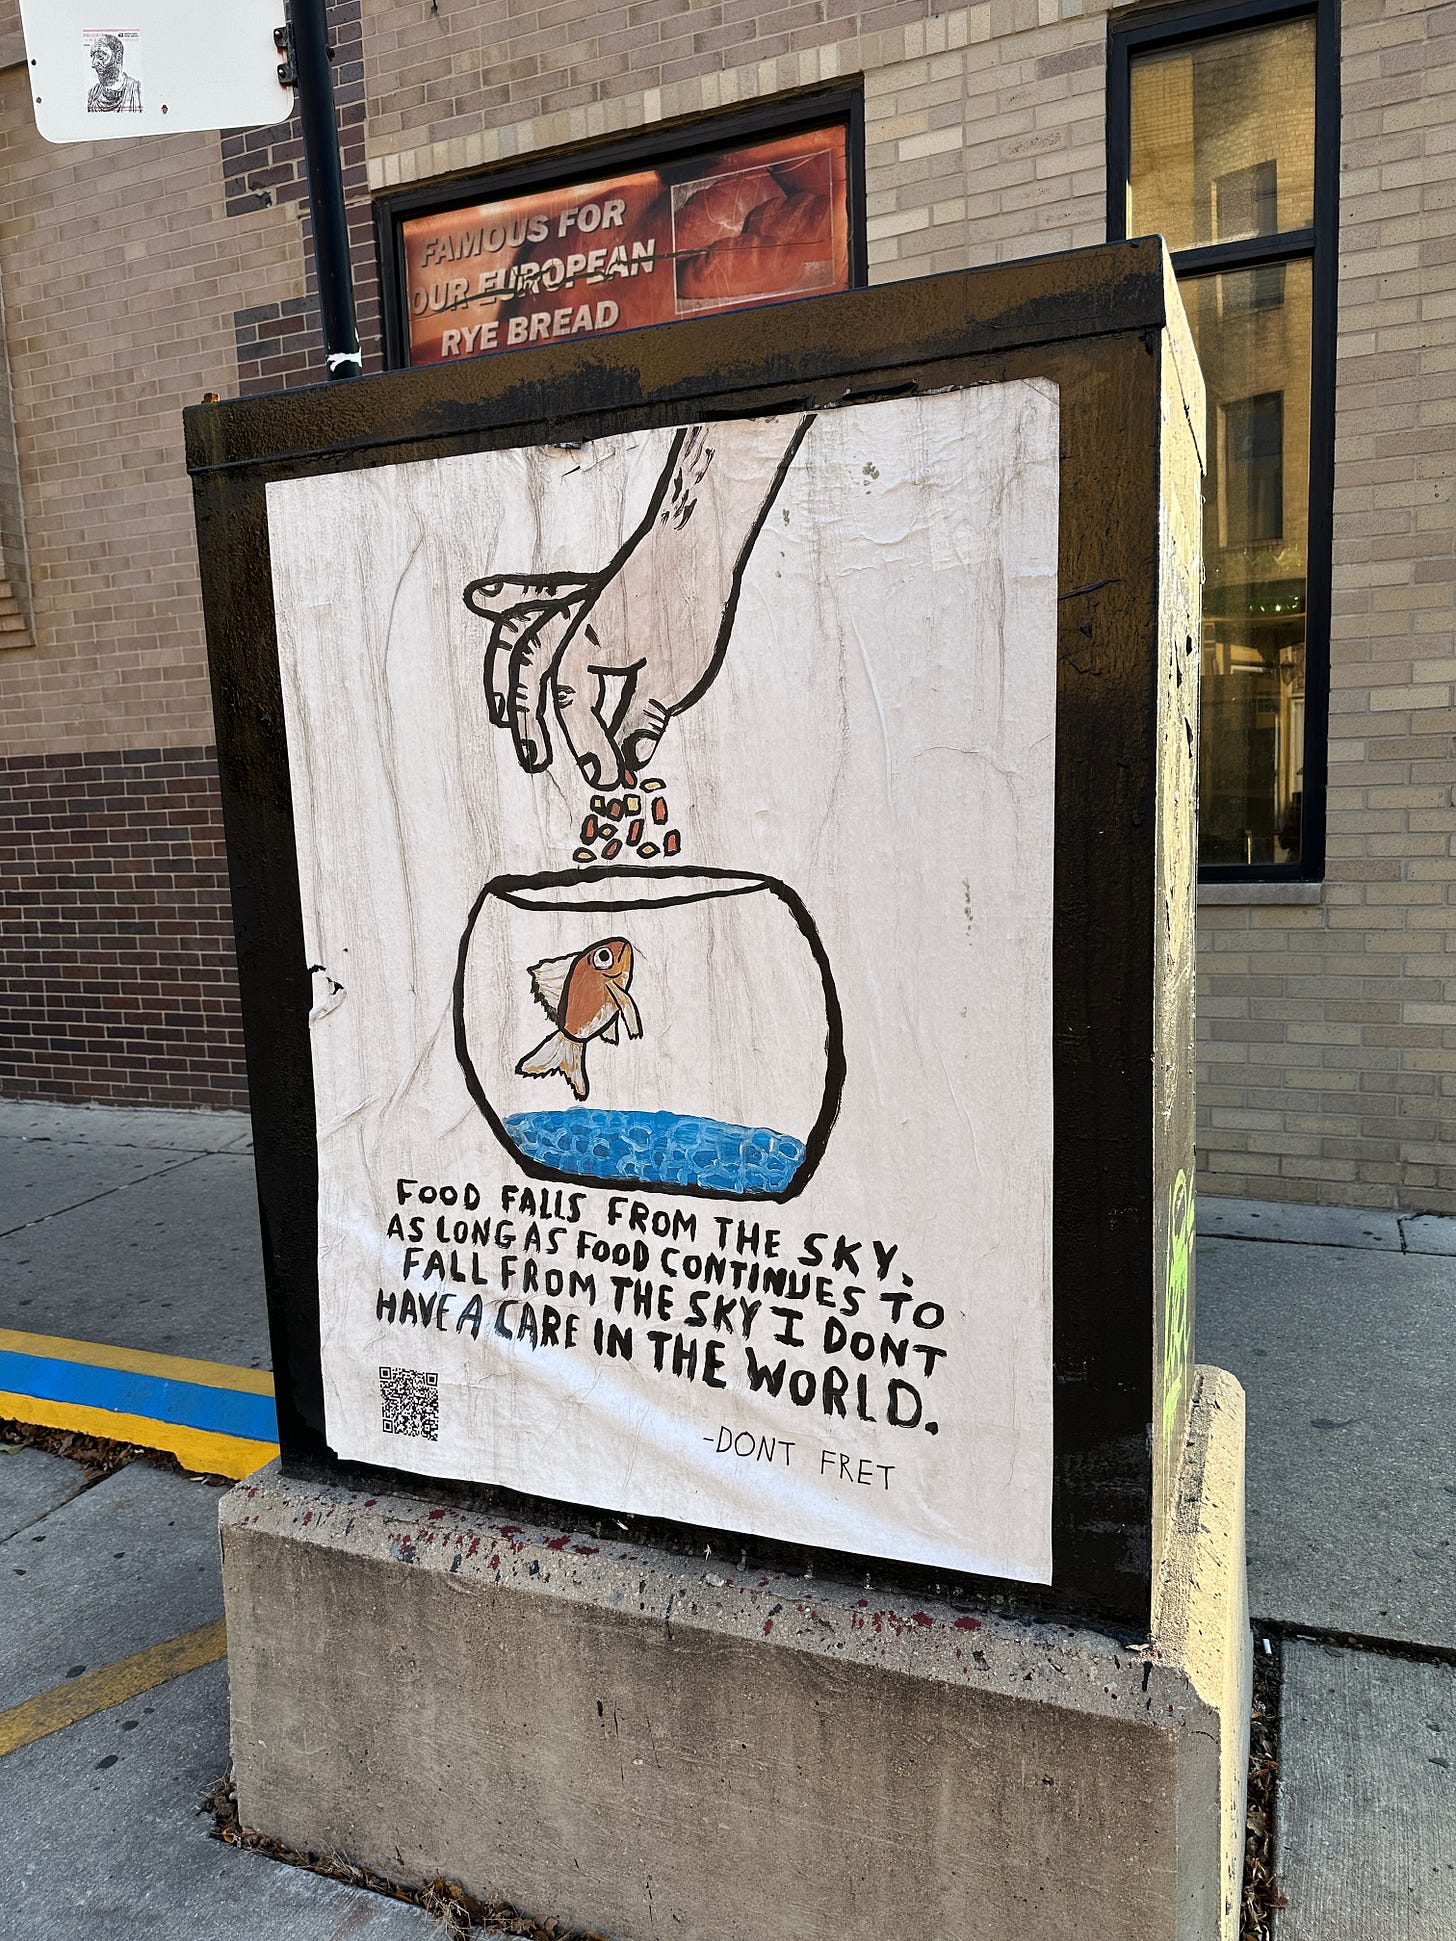 Poster in an illustrated painted style of a hand feeding a goldfish in a bowl. Underneath it says “Food falls from the sky. As long as food continues to fall from the sky I don’t have a care in the world. Don’t fret.”